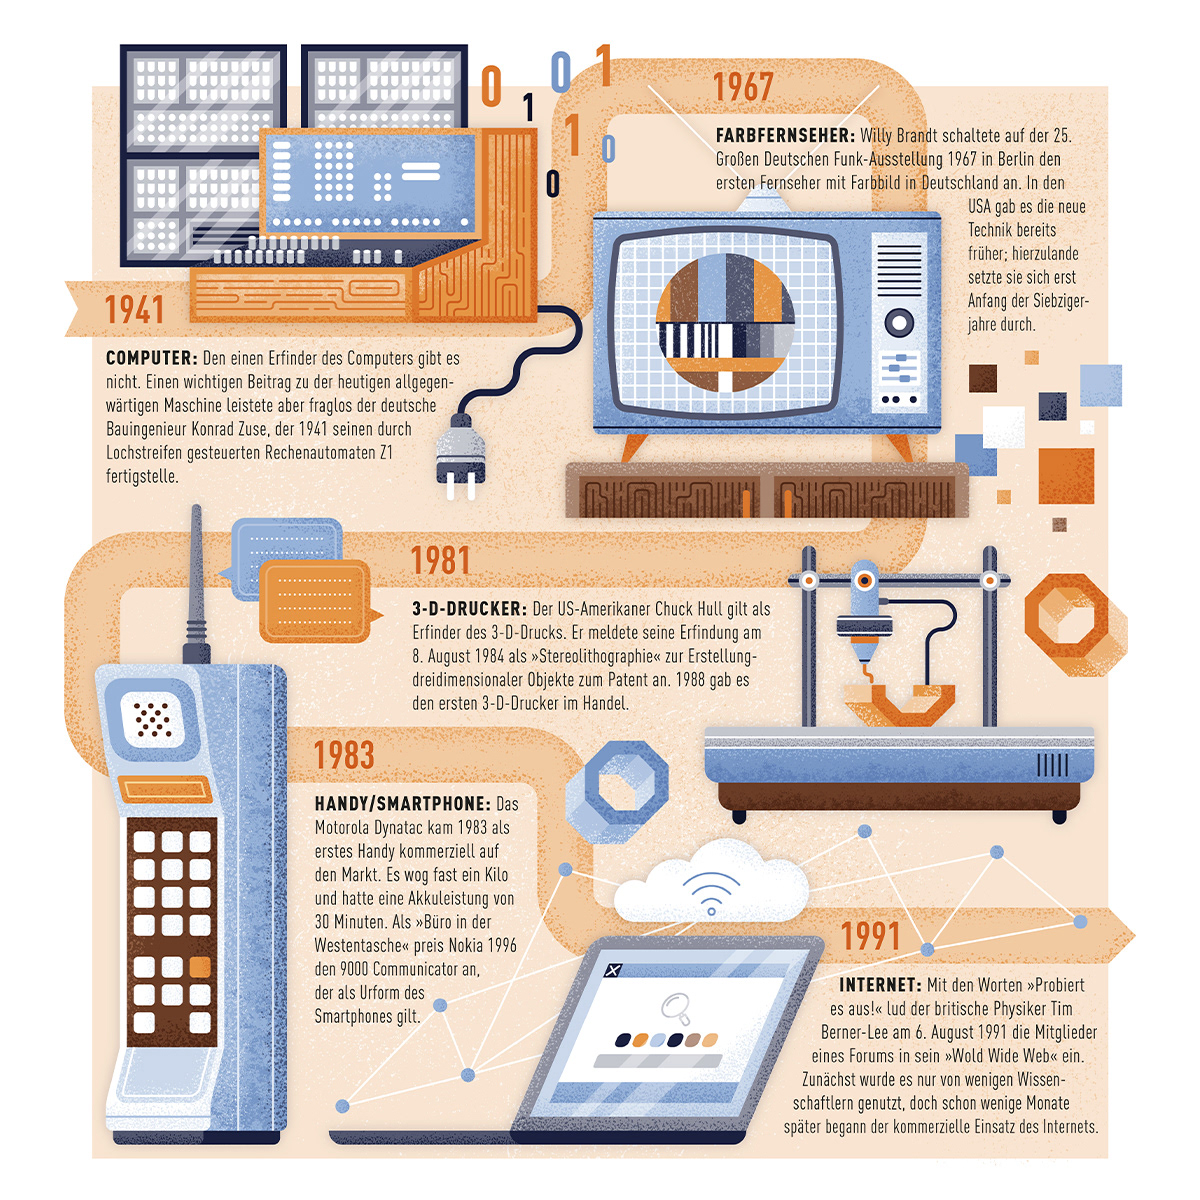 Editorial illustration about the 5 main key inventions in the last 100 years in human history 